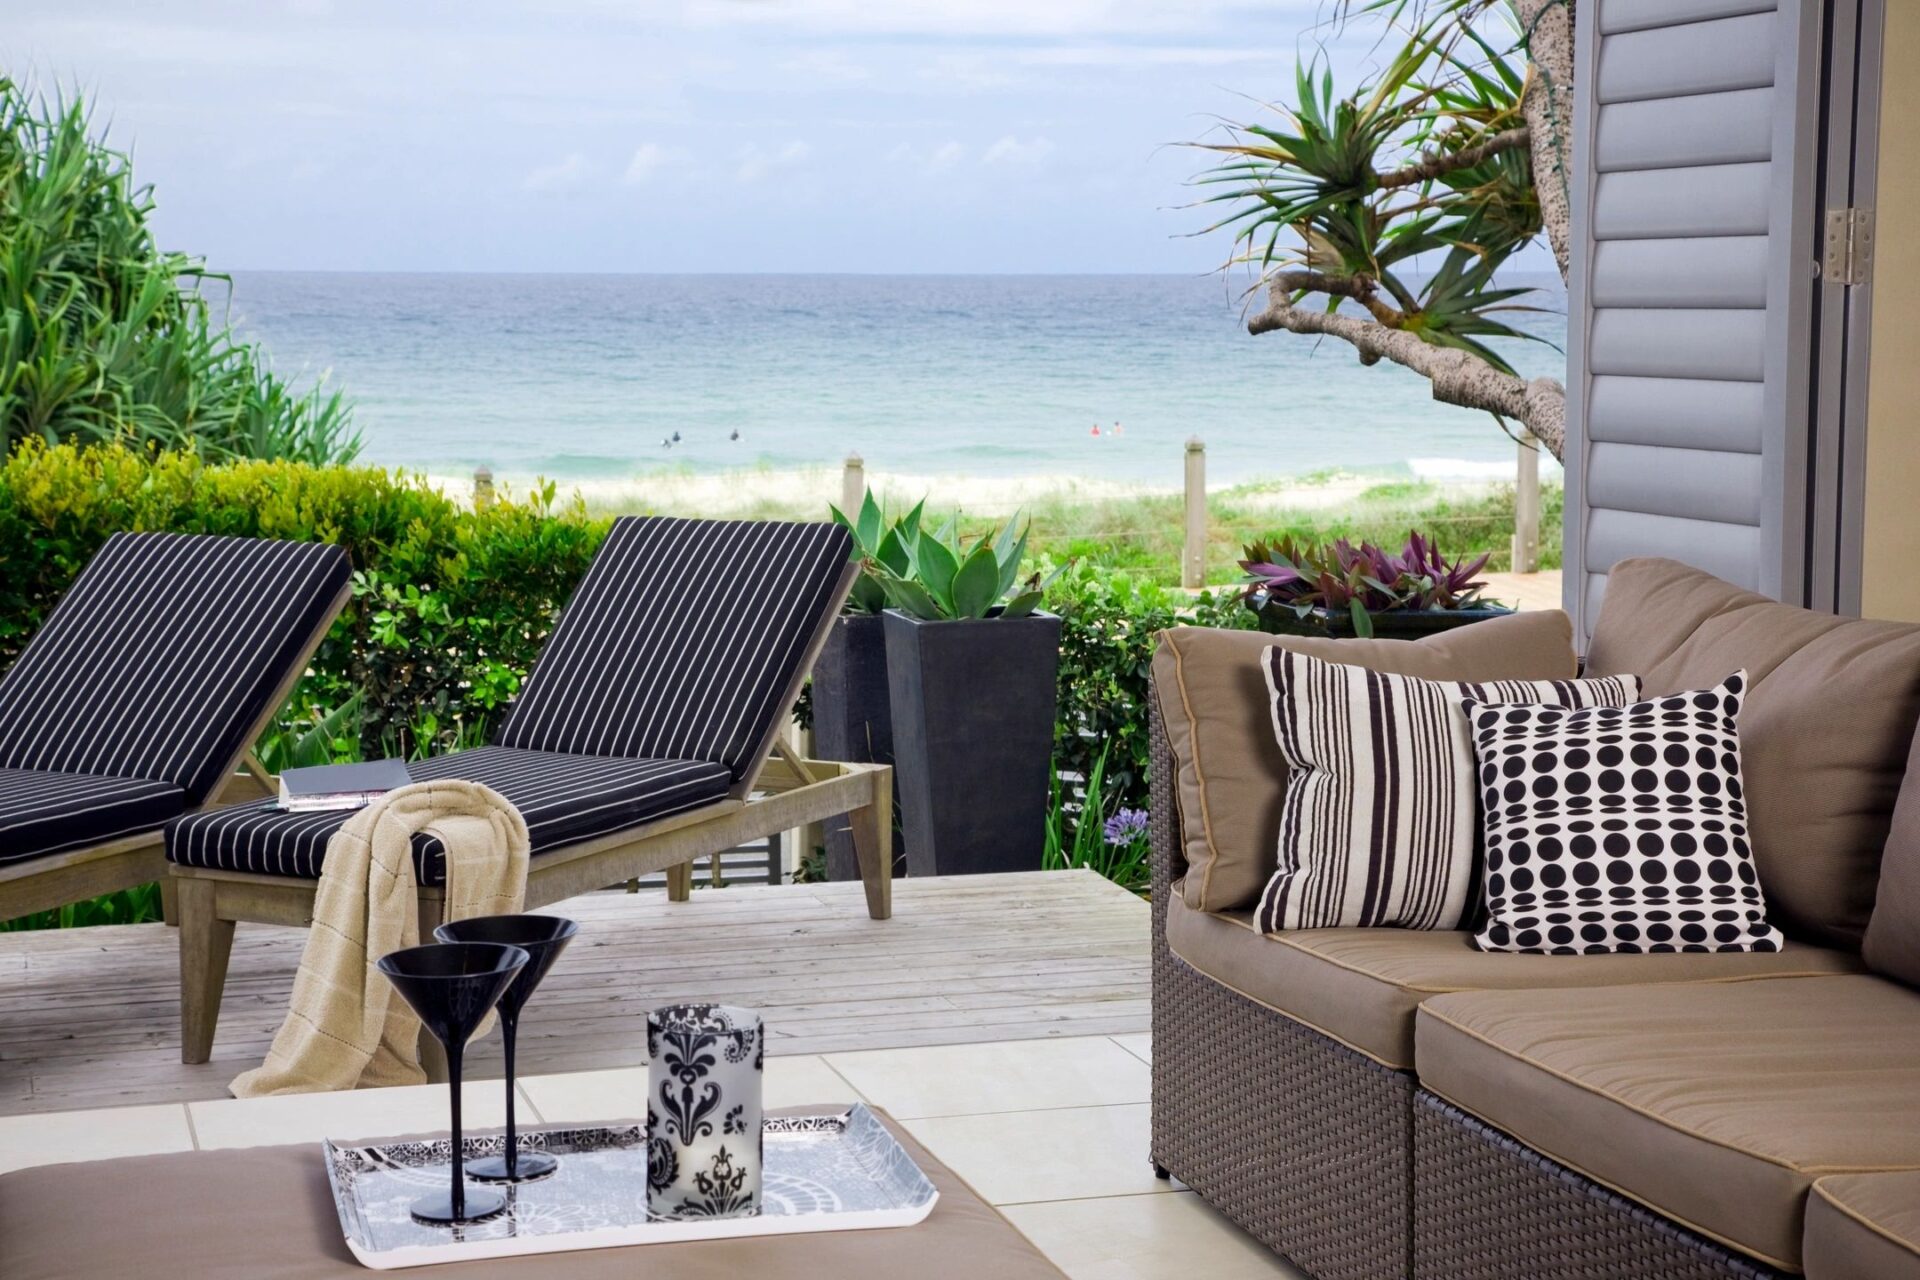 A patio with chairs and tables on the beach